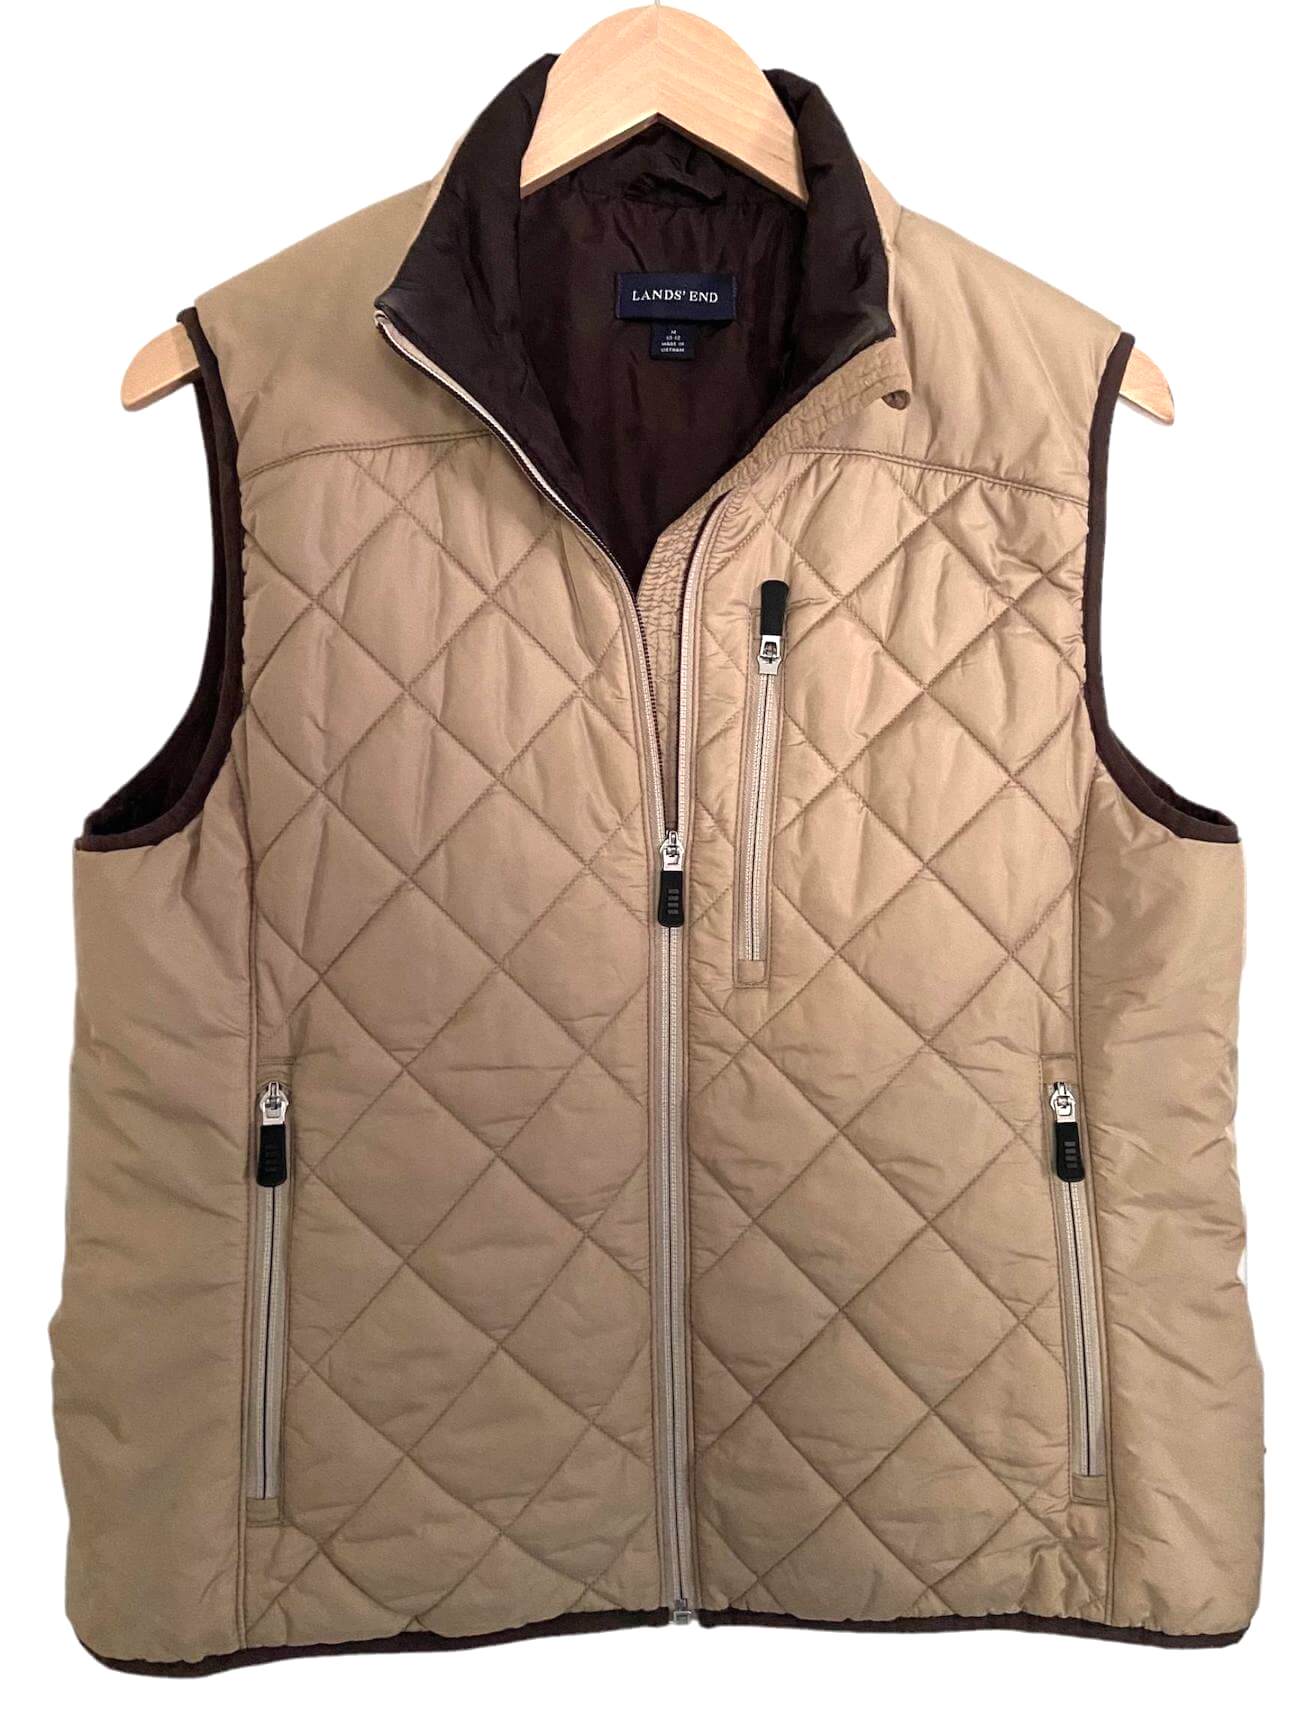 Soft Autumn LAND'S END brown and tan quilted puffer vest